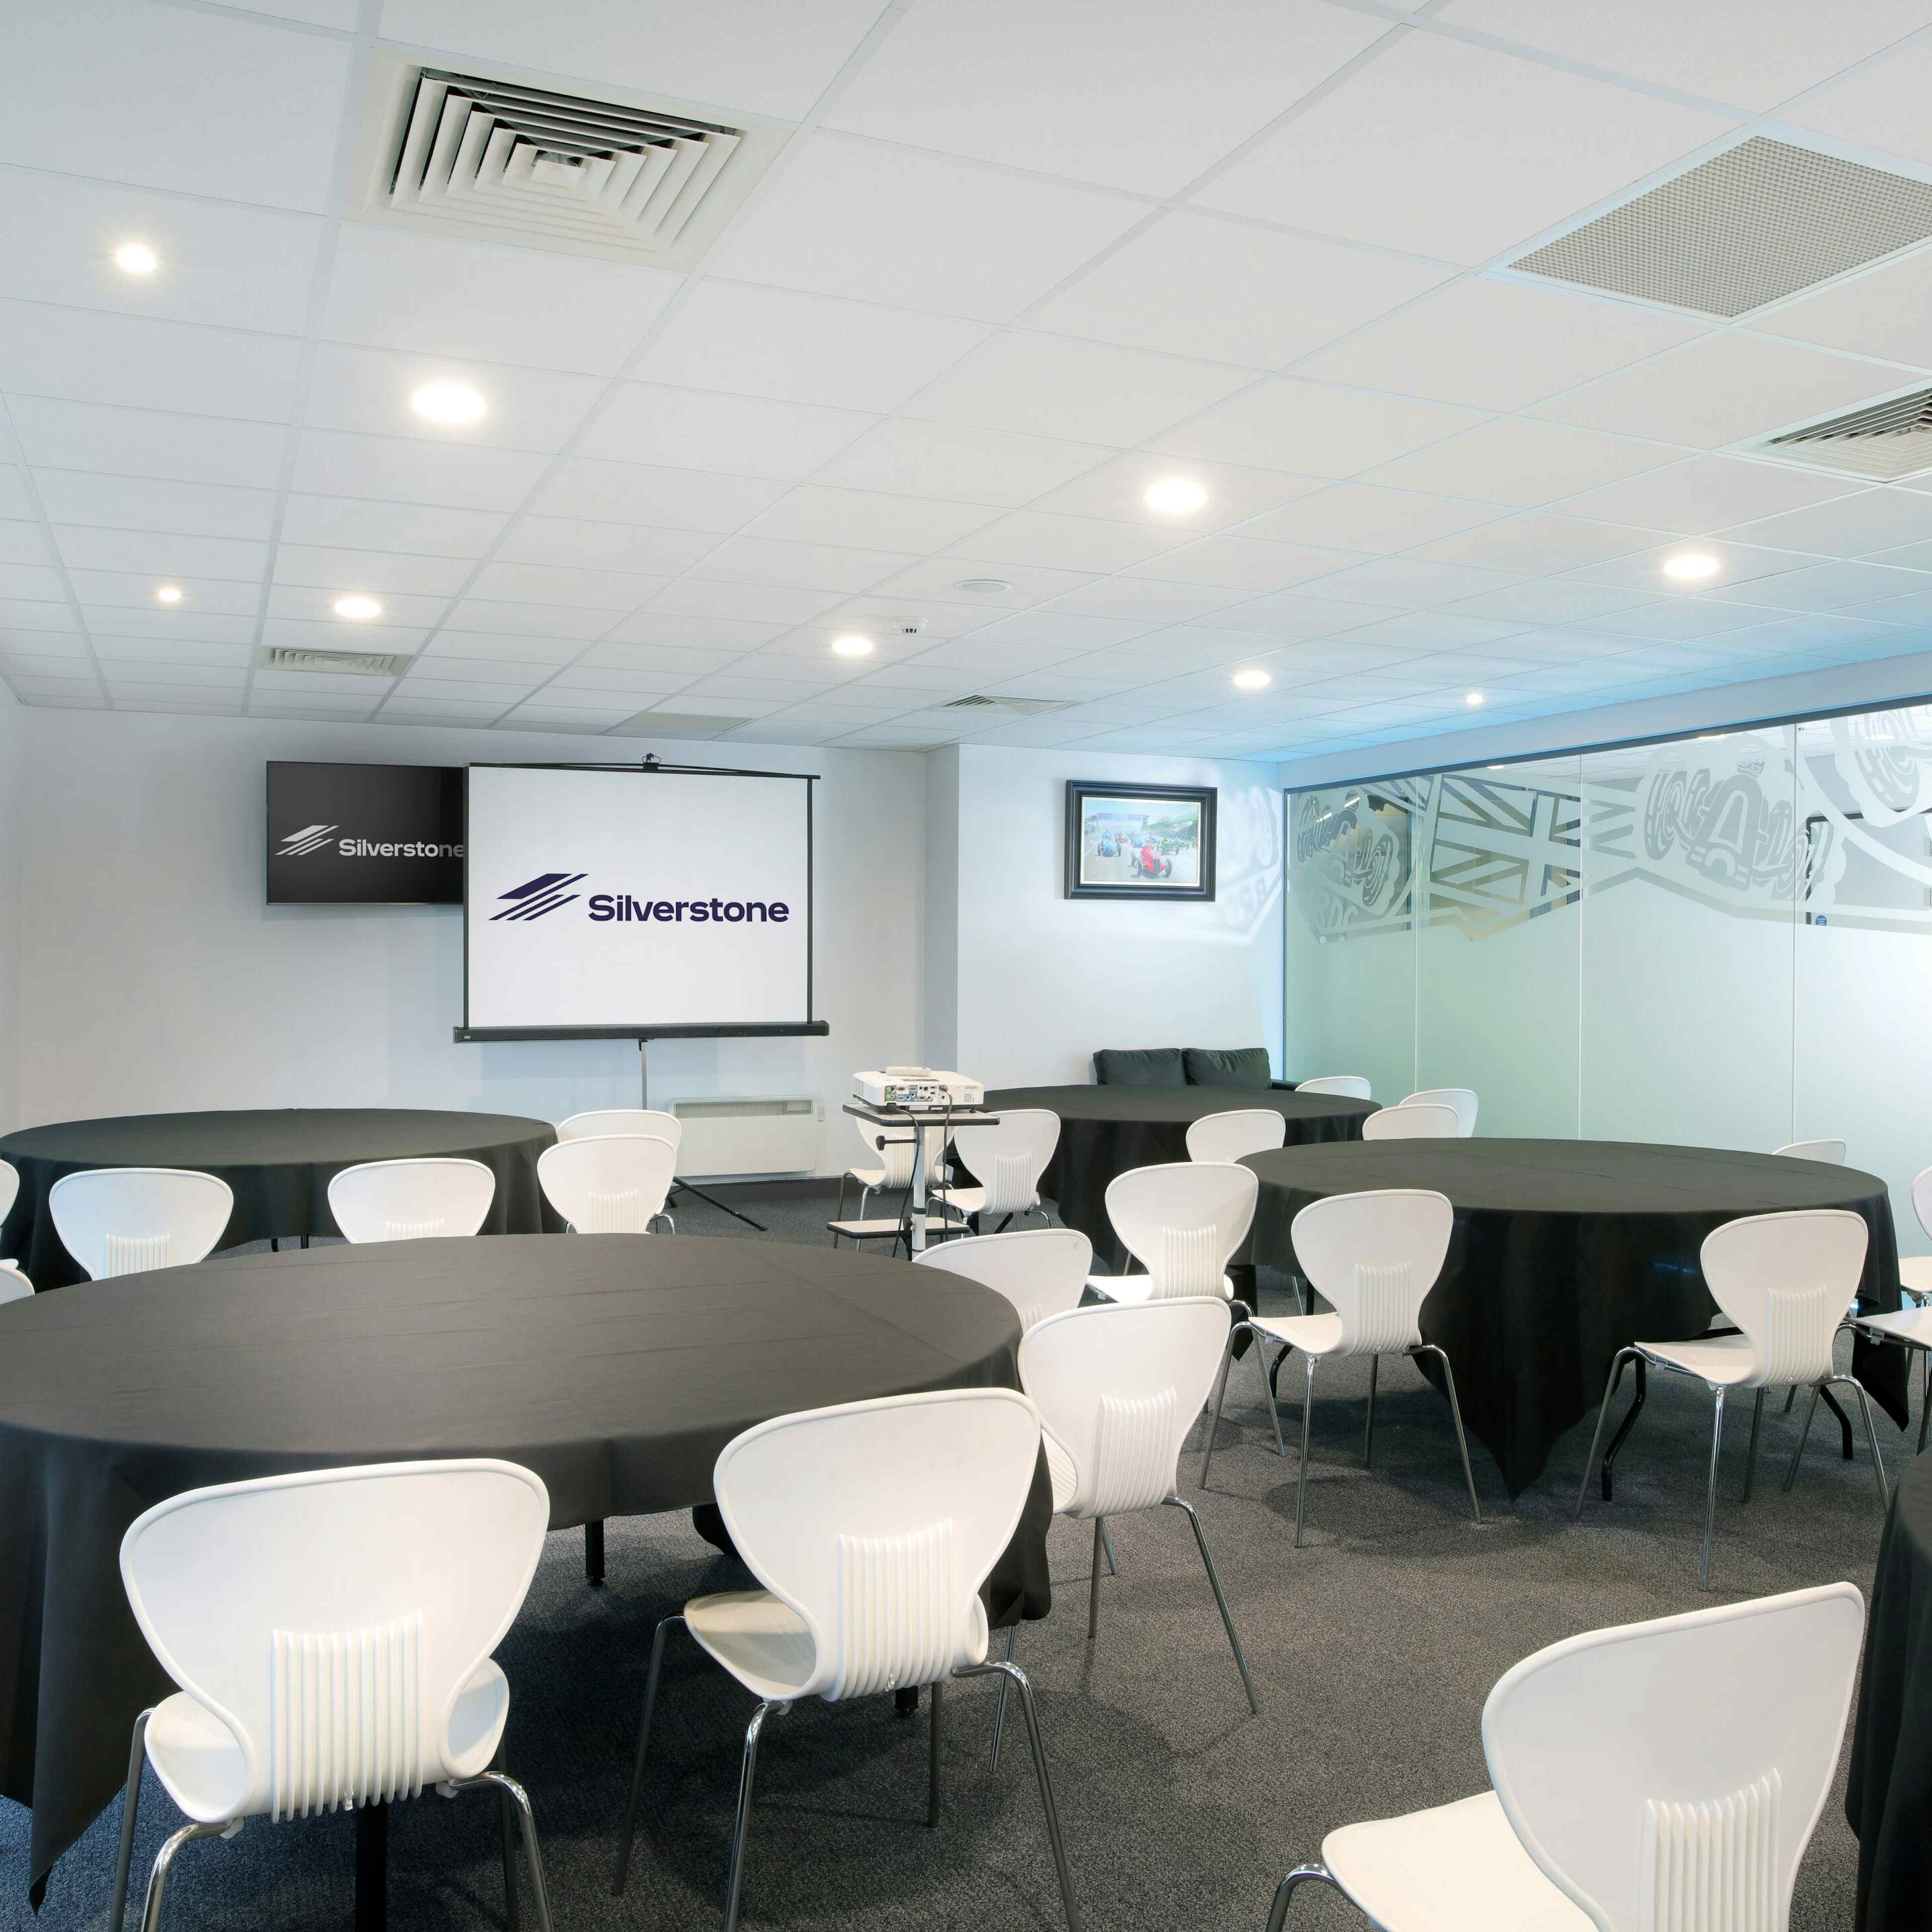 Silverstone International Conference & Exhibition Centre - President's Suite image 2